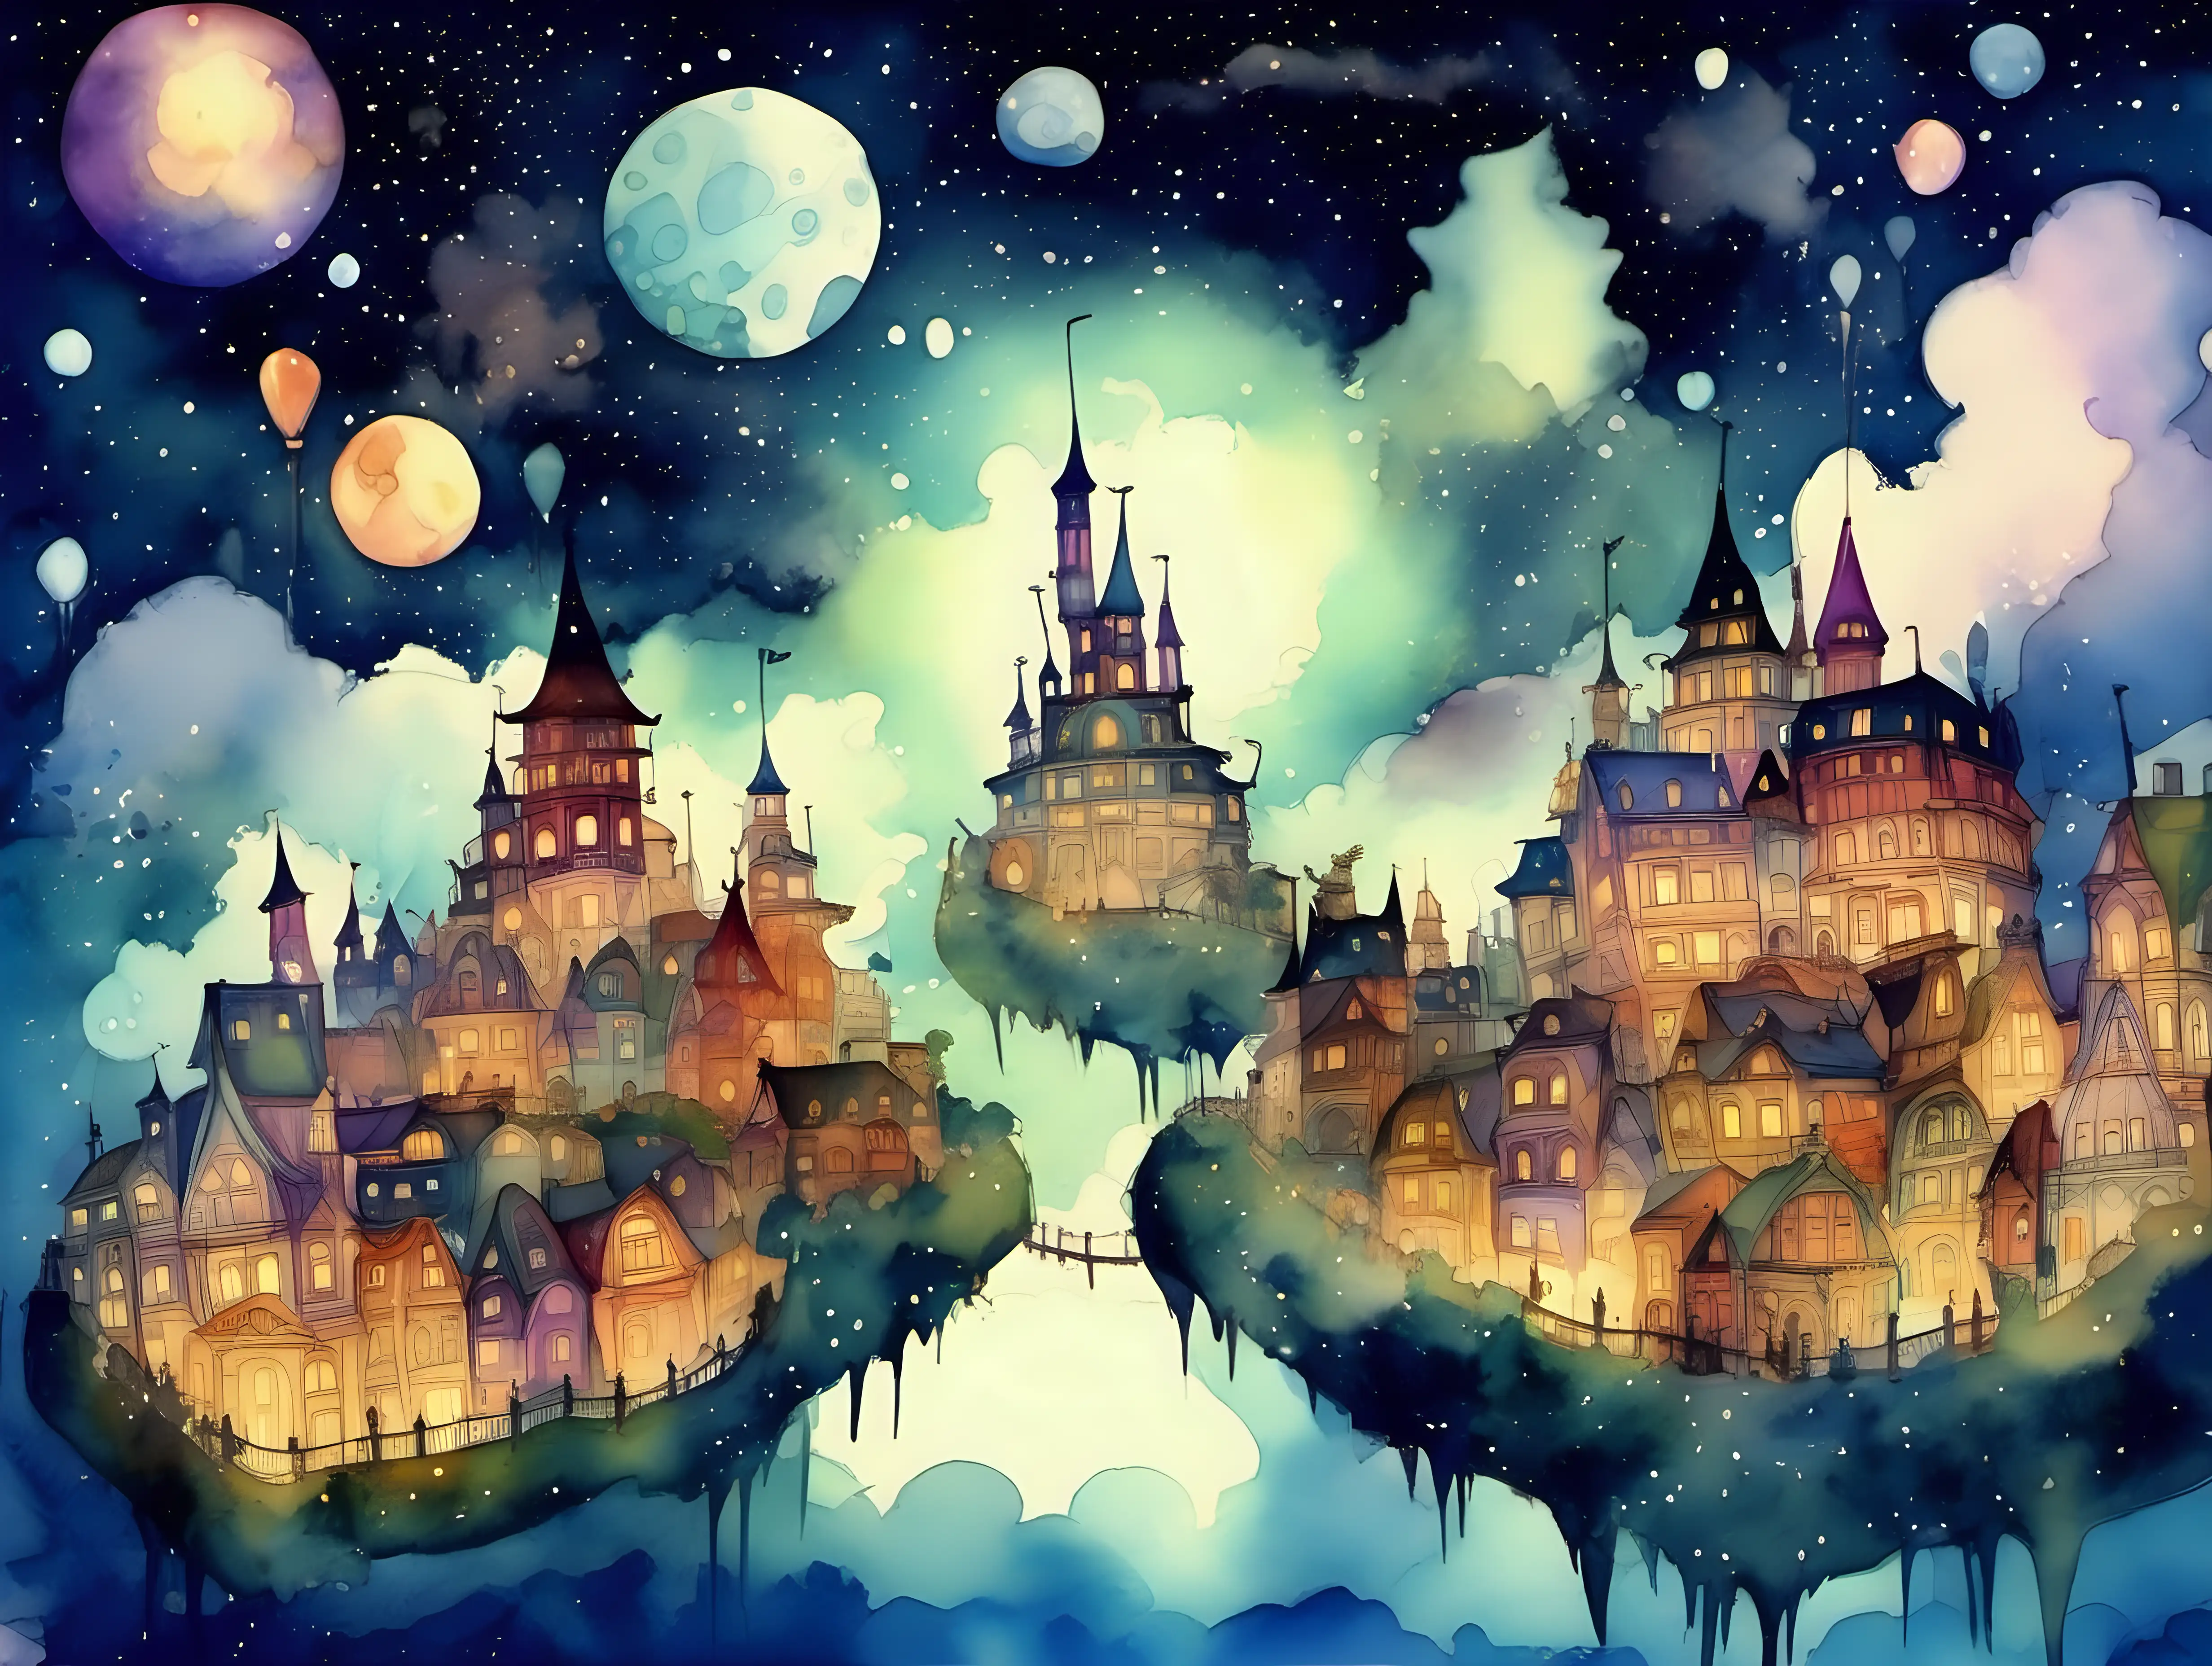 Dreamland itself should be a fantastical, whimsical city, filled with elements like floating islands, starry skies, colorful meadows, and whimsical architecture like cloud castles. The environment should feel magical, safe, and inviting, sparking a sense of wonder and endless possibility. night time, watercolor style